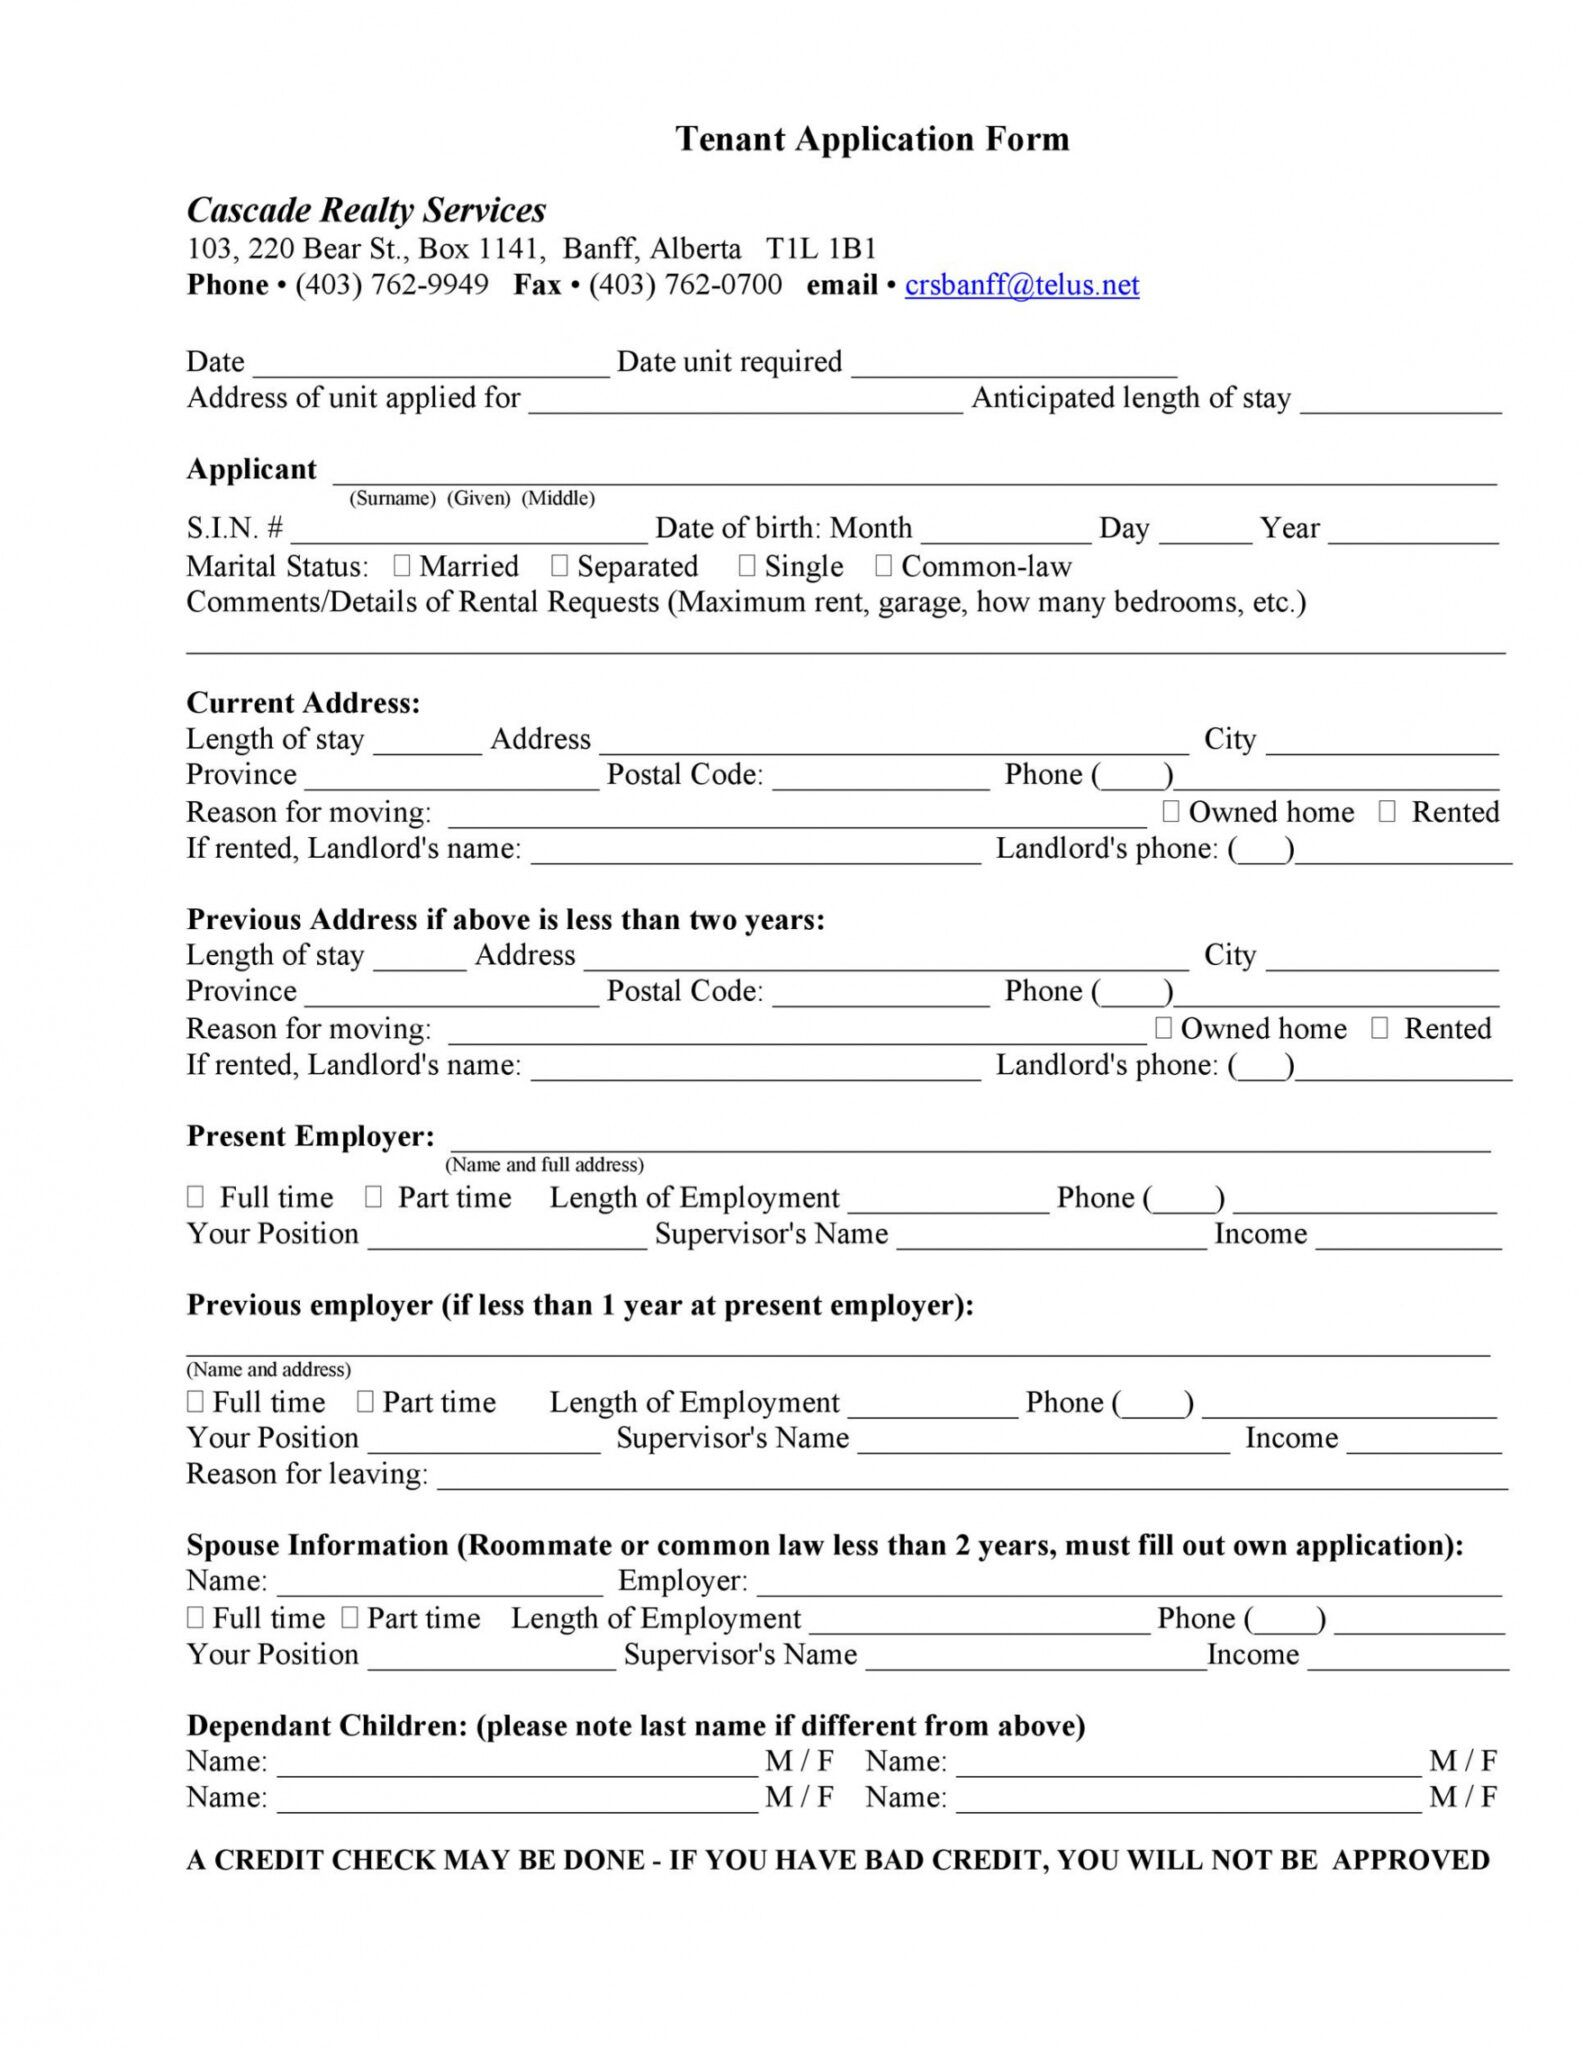 Forms Of Id For Rental Application 2022 RentalApplicationForm